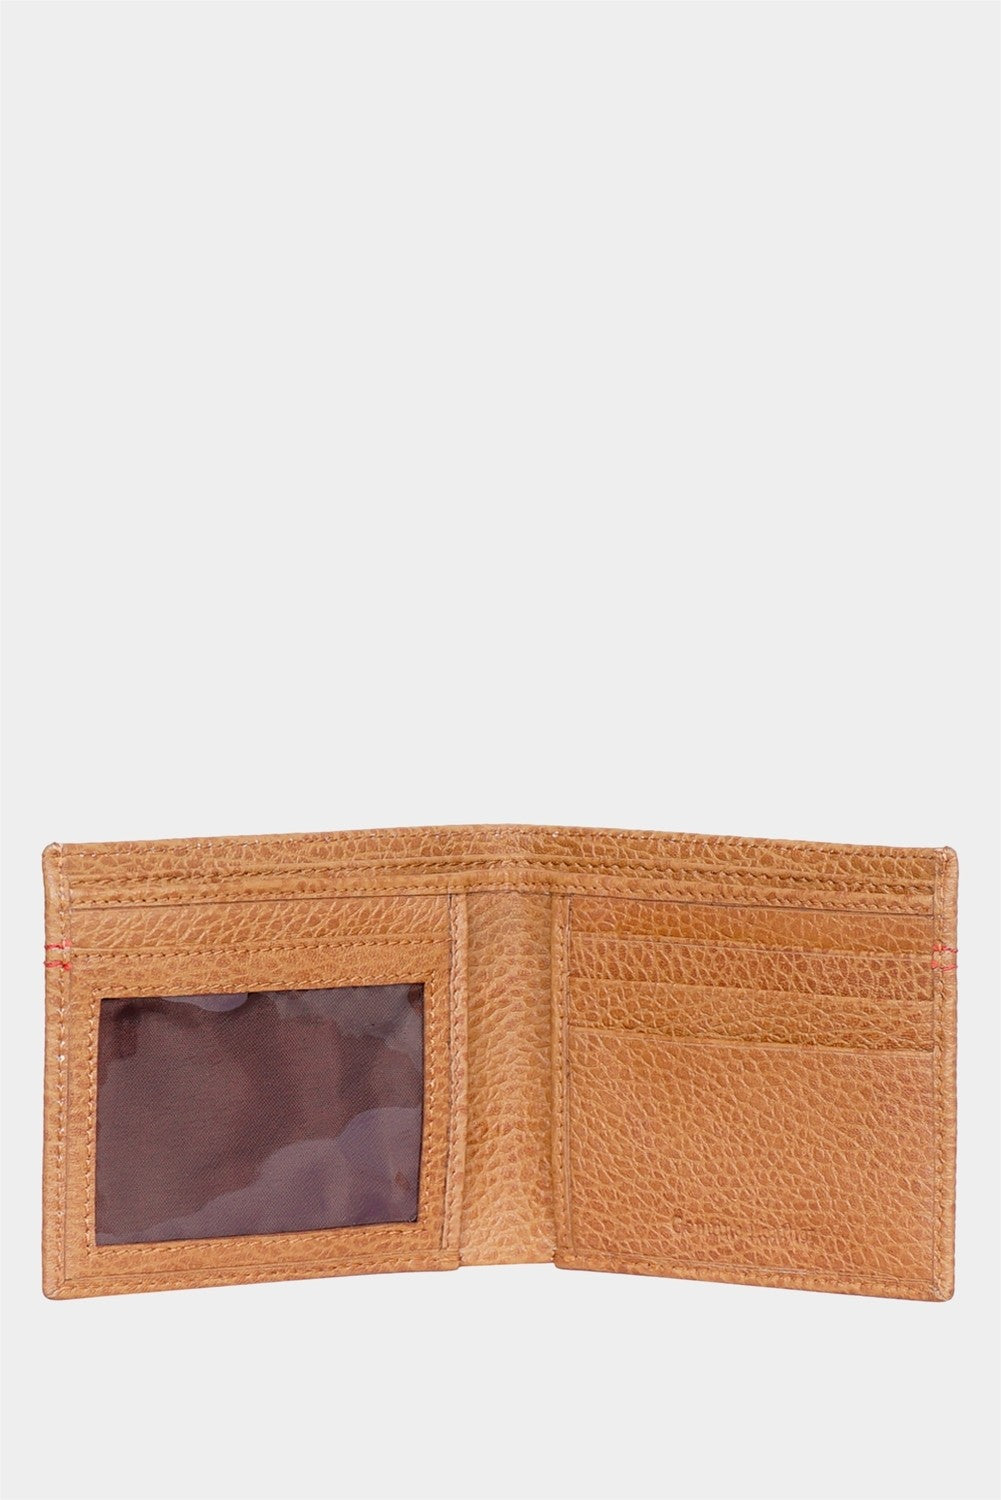 Justanned Stylish Treated Men Wallet